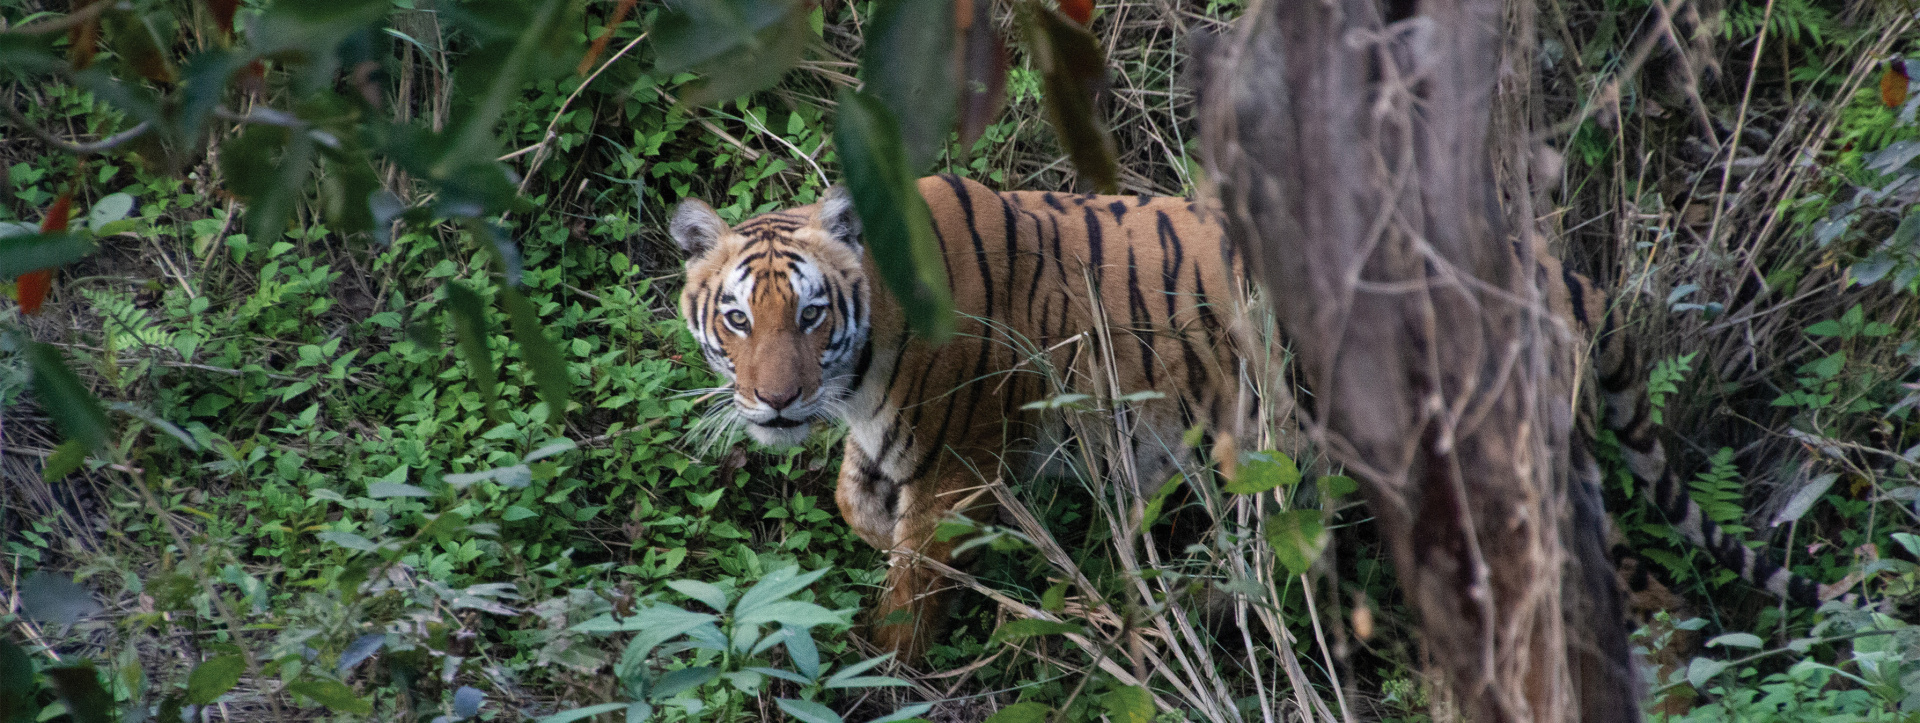 A tiger on the prowl in bardia national park in nepal. Tiger populations have almost tripled across the terai arc landscape in nepal since 2009.